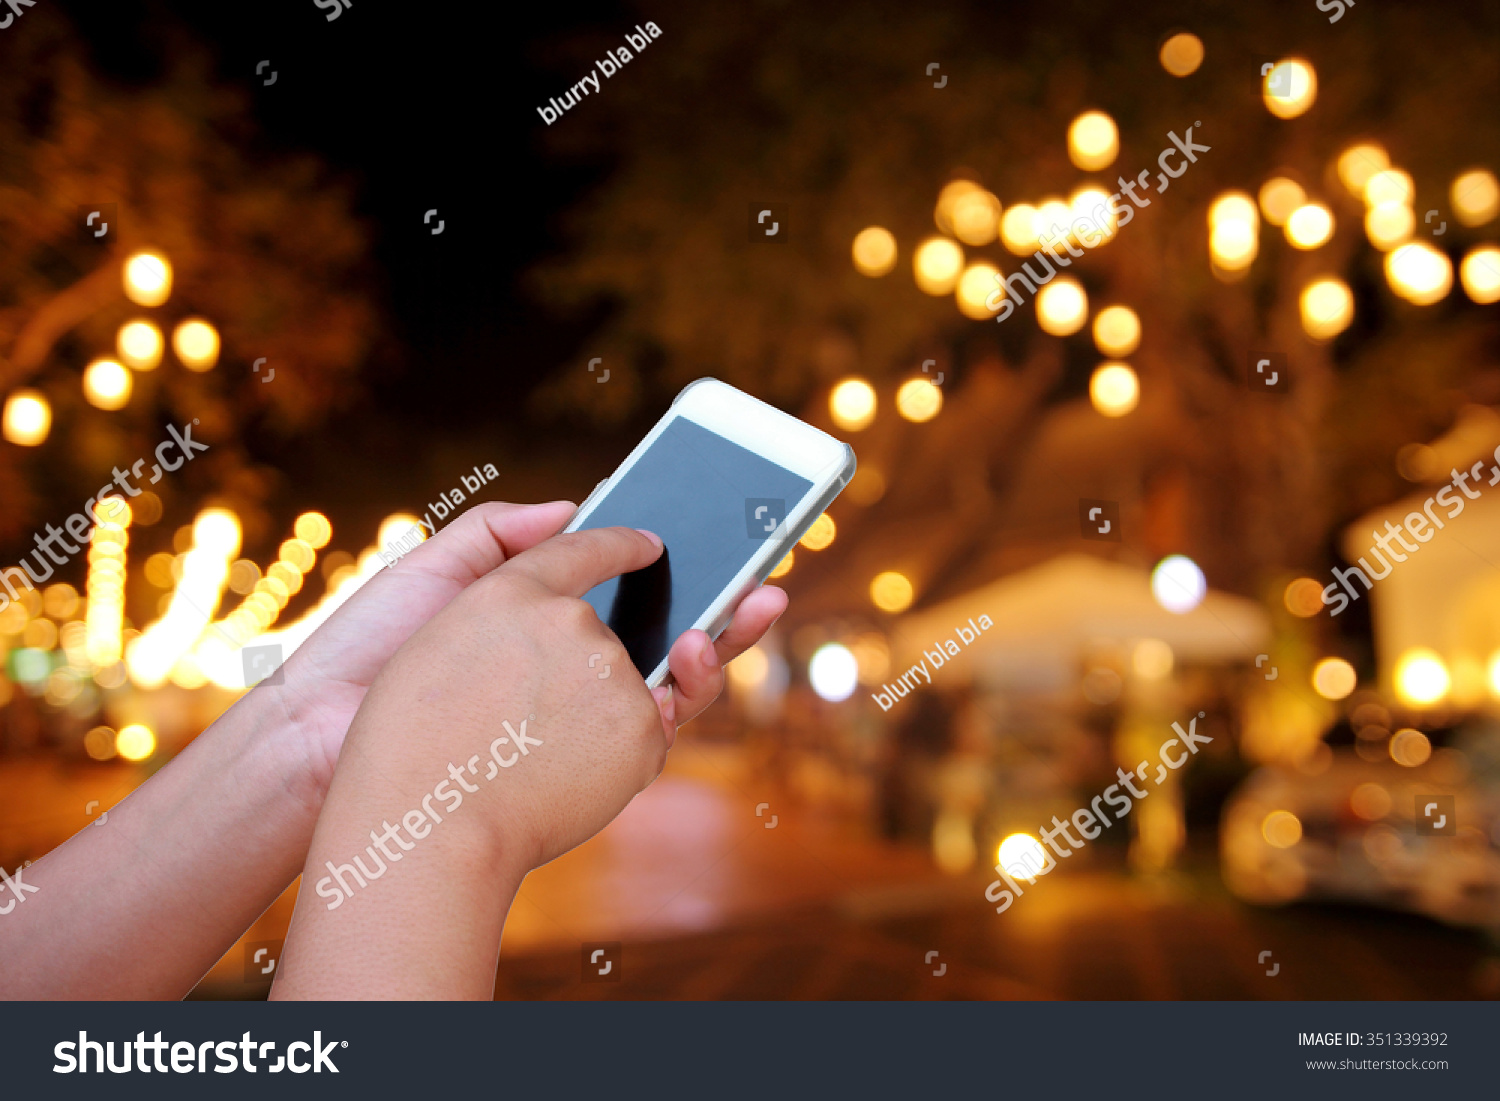 hand hold and touch screen smart phone, on abstract  blurred photo night festival on street #351339392